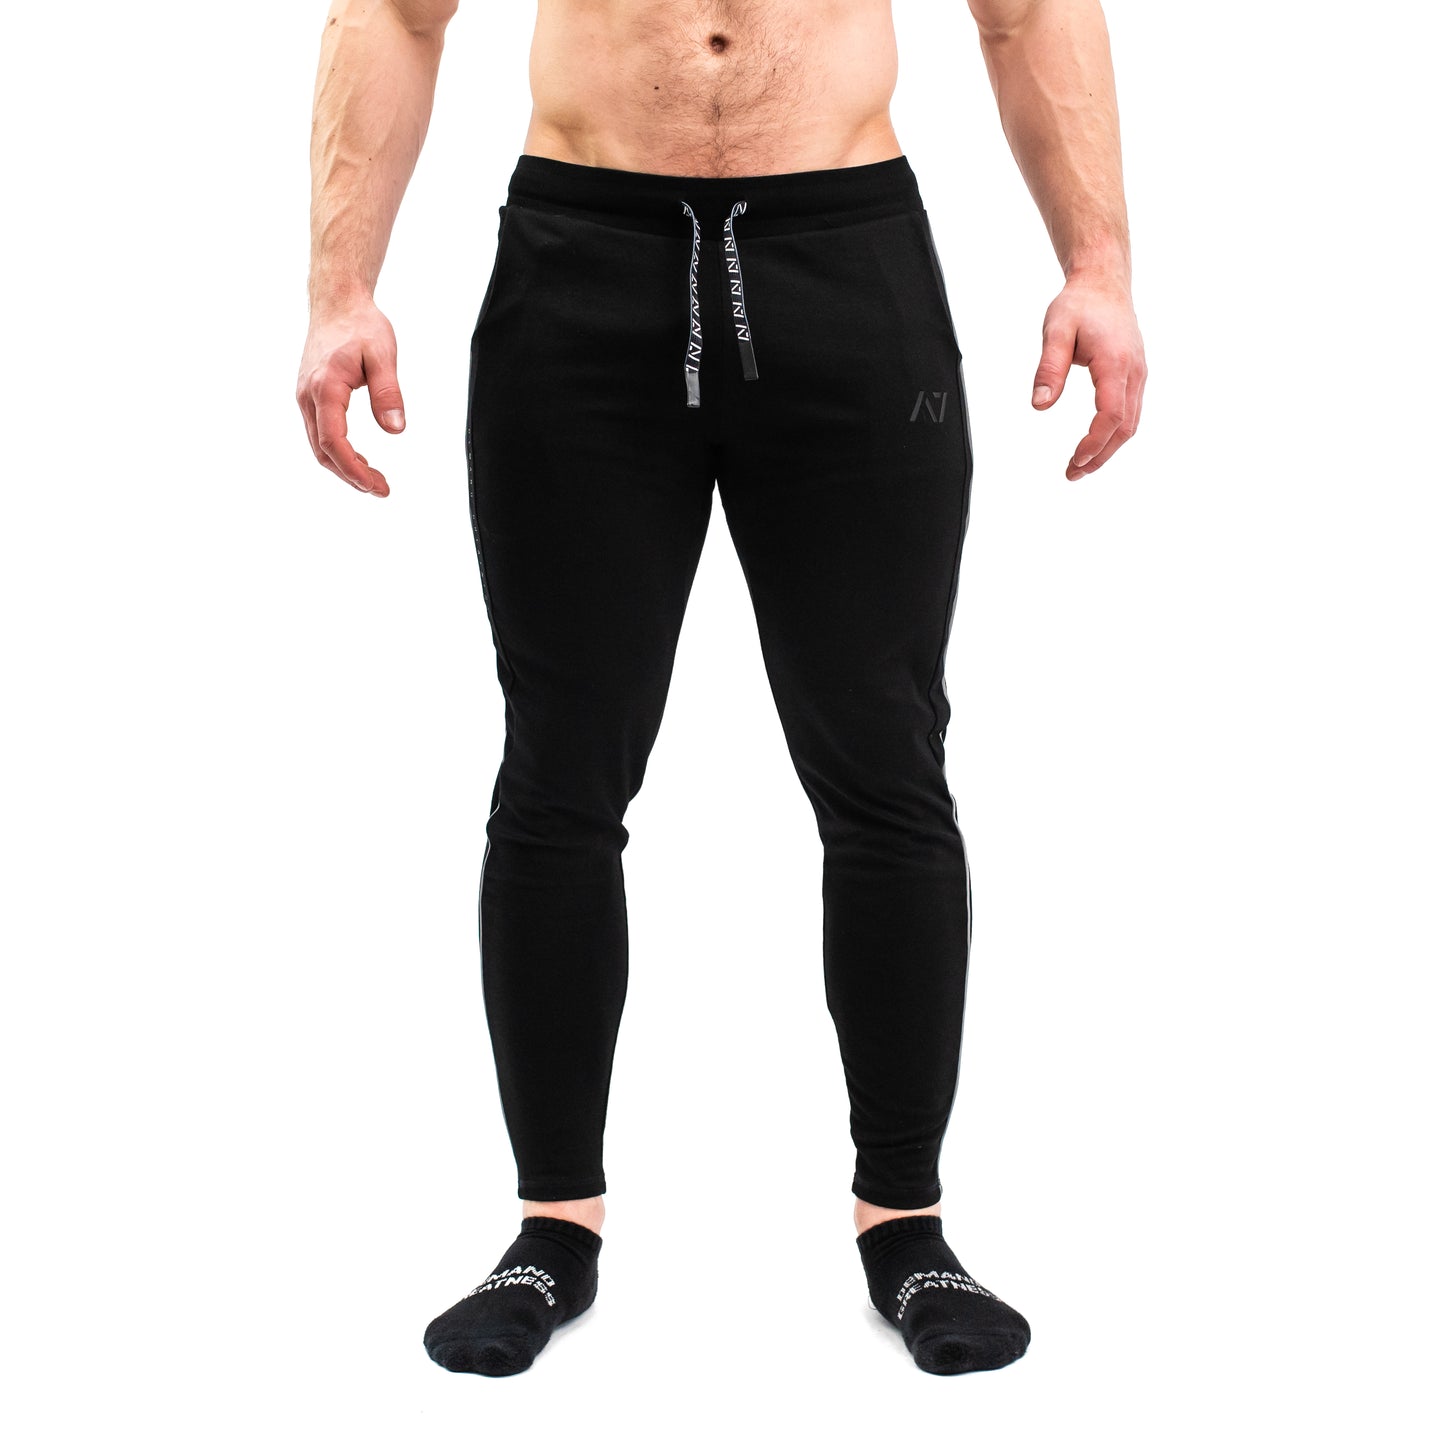 YoungLA Gym Pants for Men, Slim Fit Tapered Sweatpants